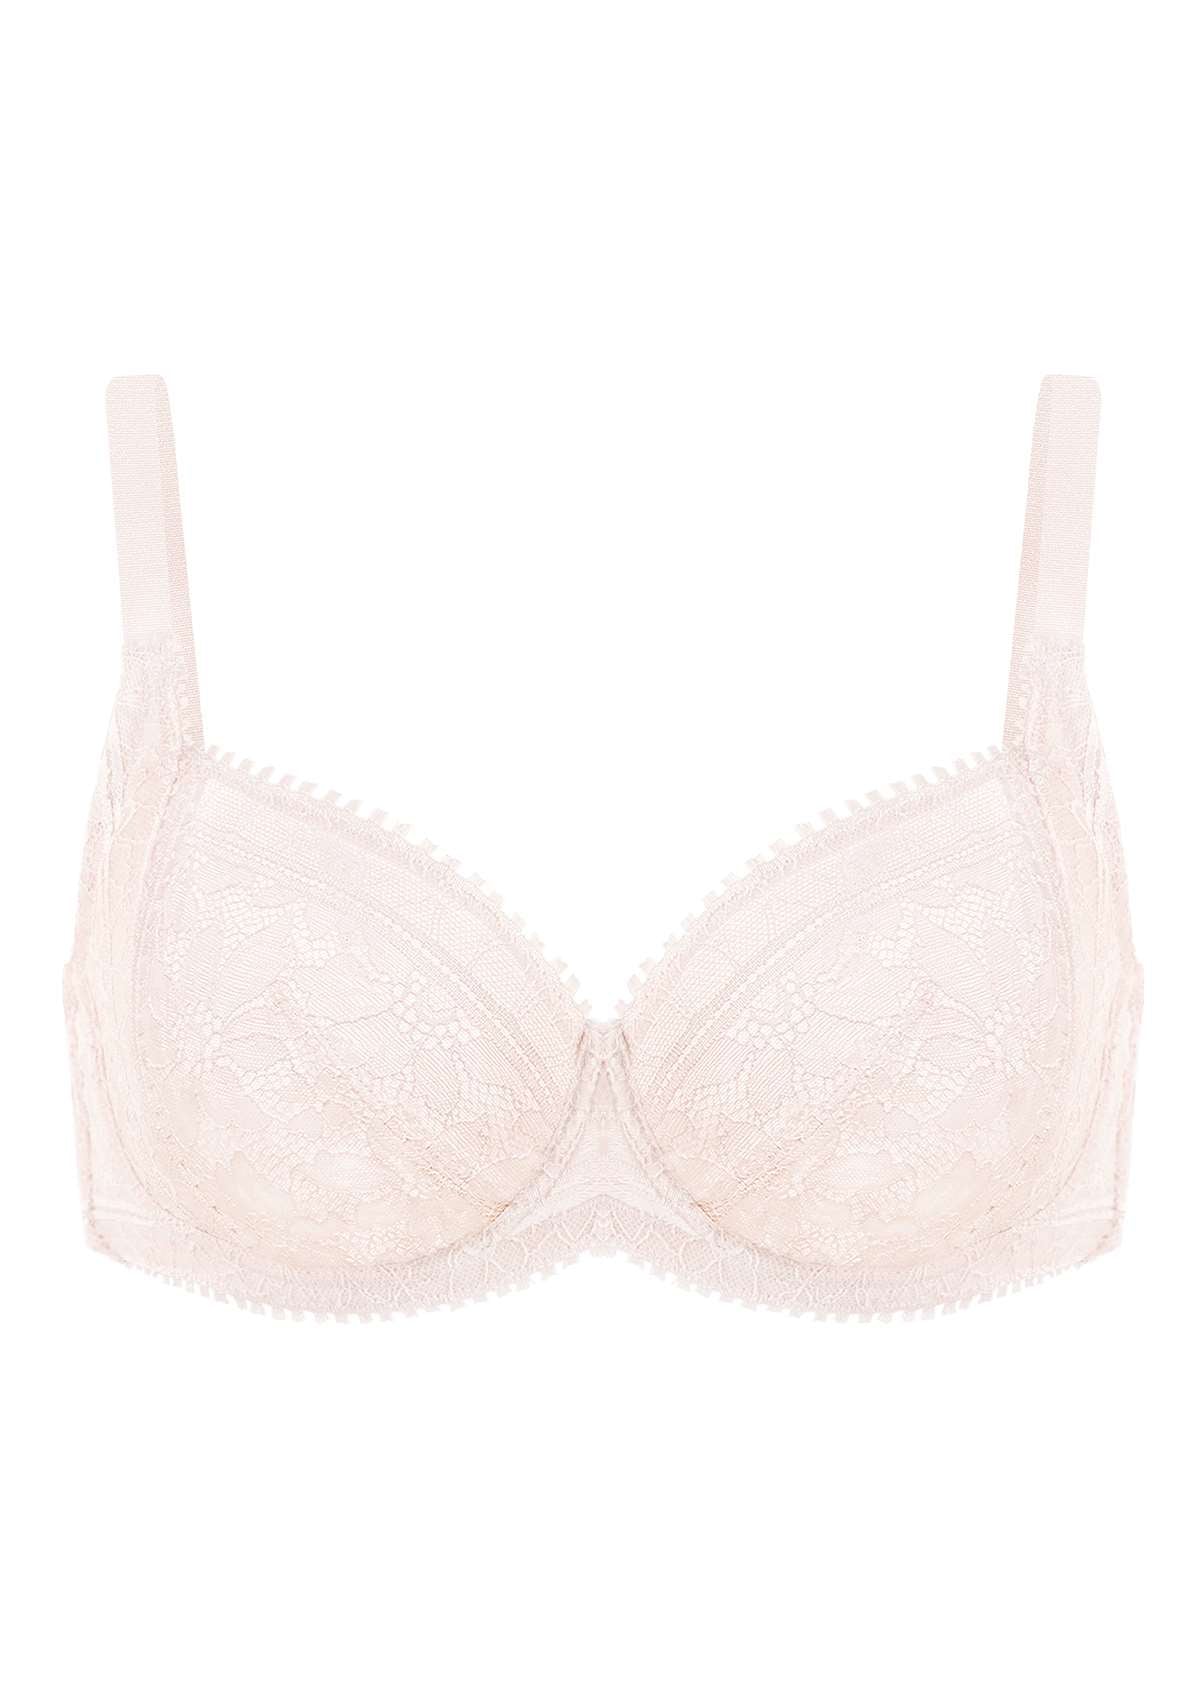 HSIA Silene Floral Delicate Unlined Lace Soft Cup Uplift Bra - Champagne / 42 / DD/E